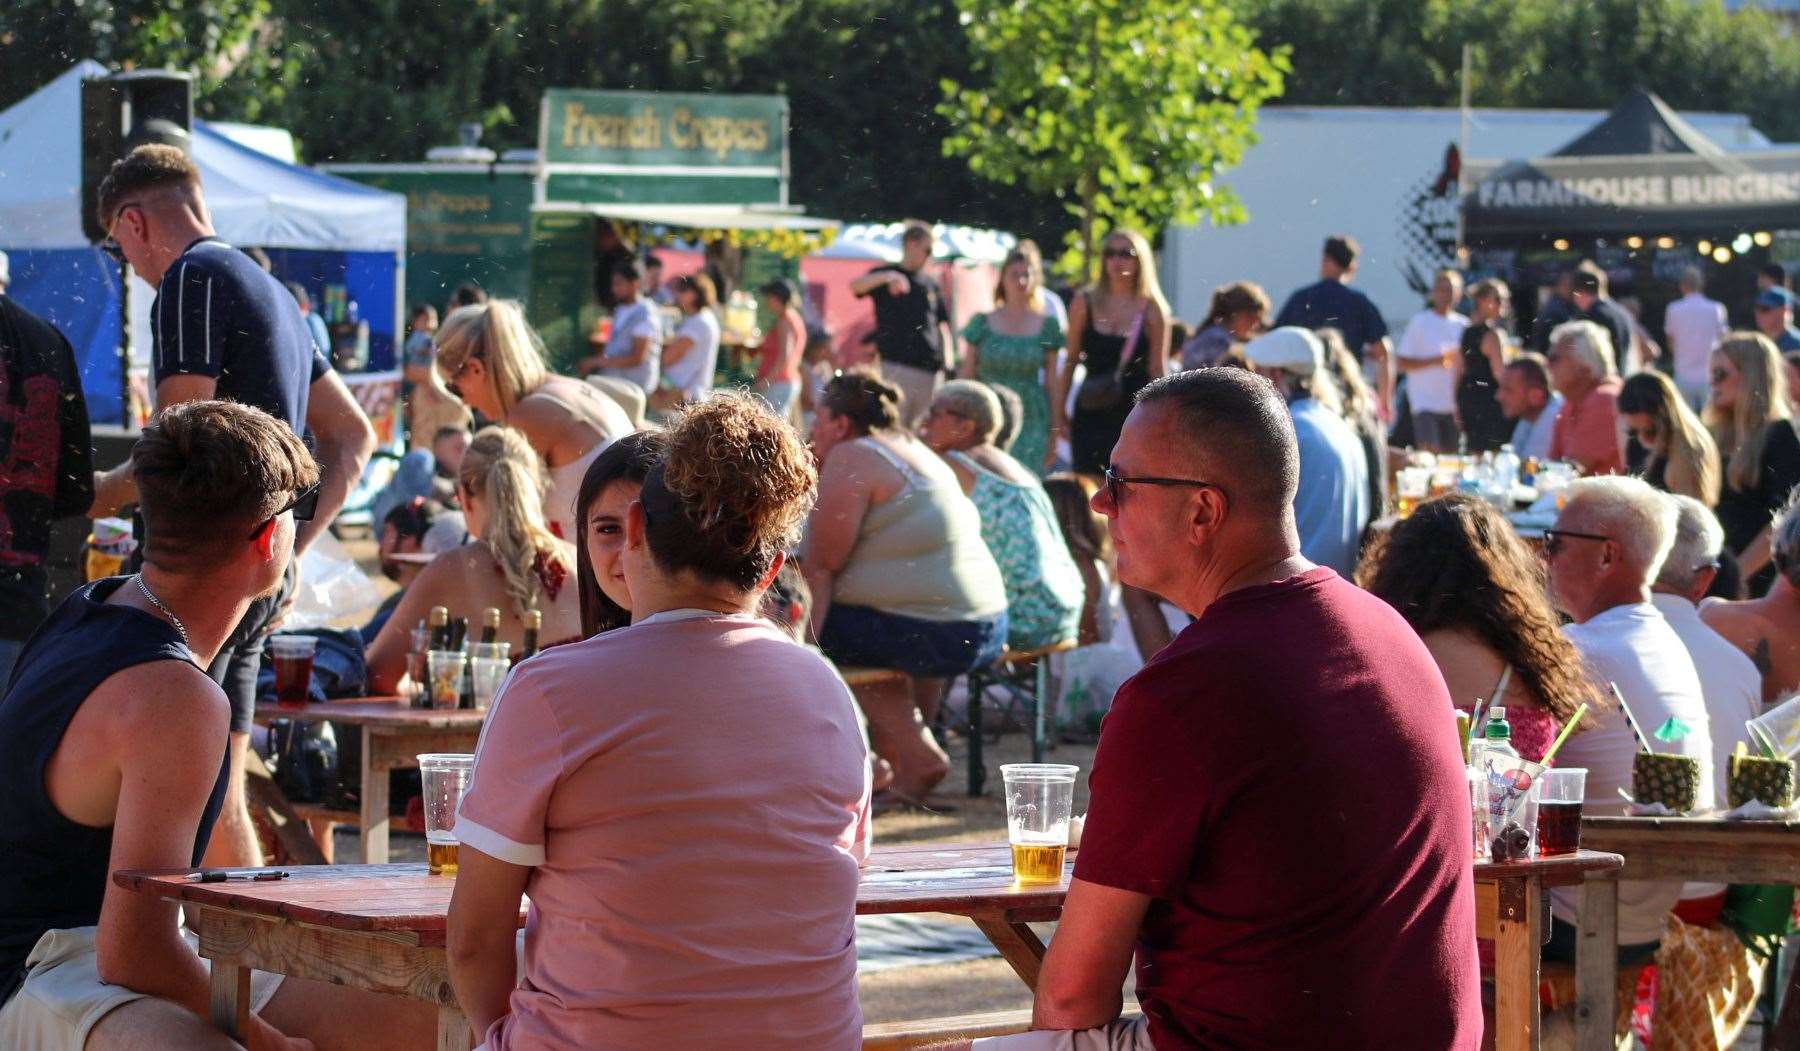 The food festival takes place in September